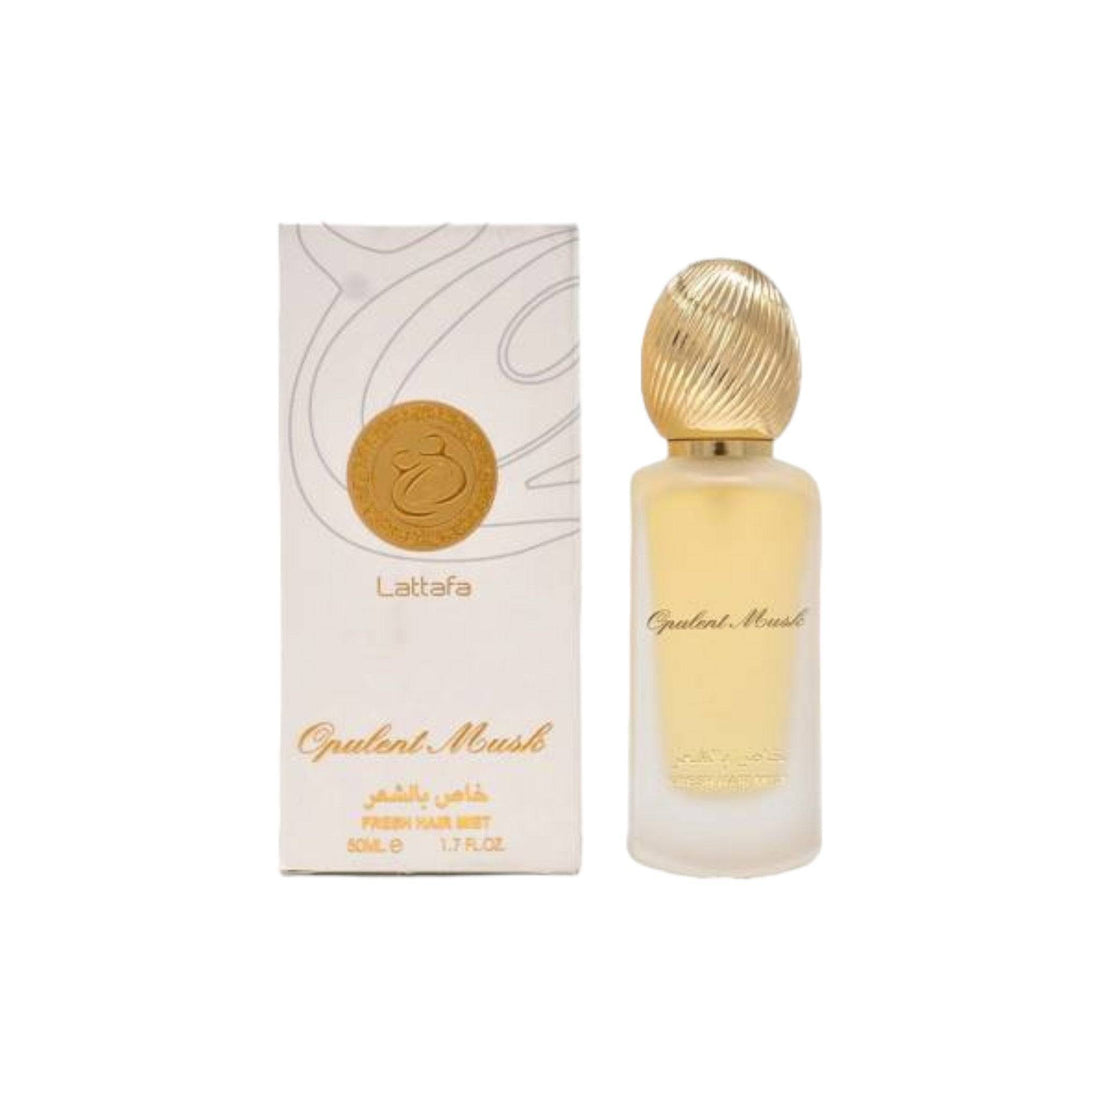 Lattafa Opulent Musk 50ml Hair Mist bottle, a blend of elegance and purity with white musk notes.